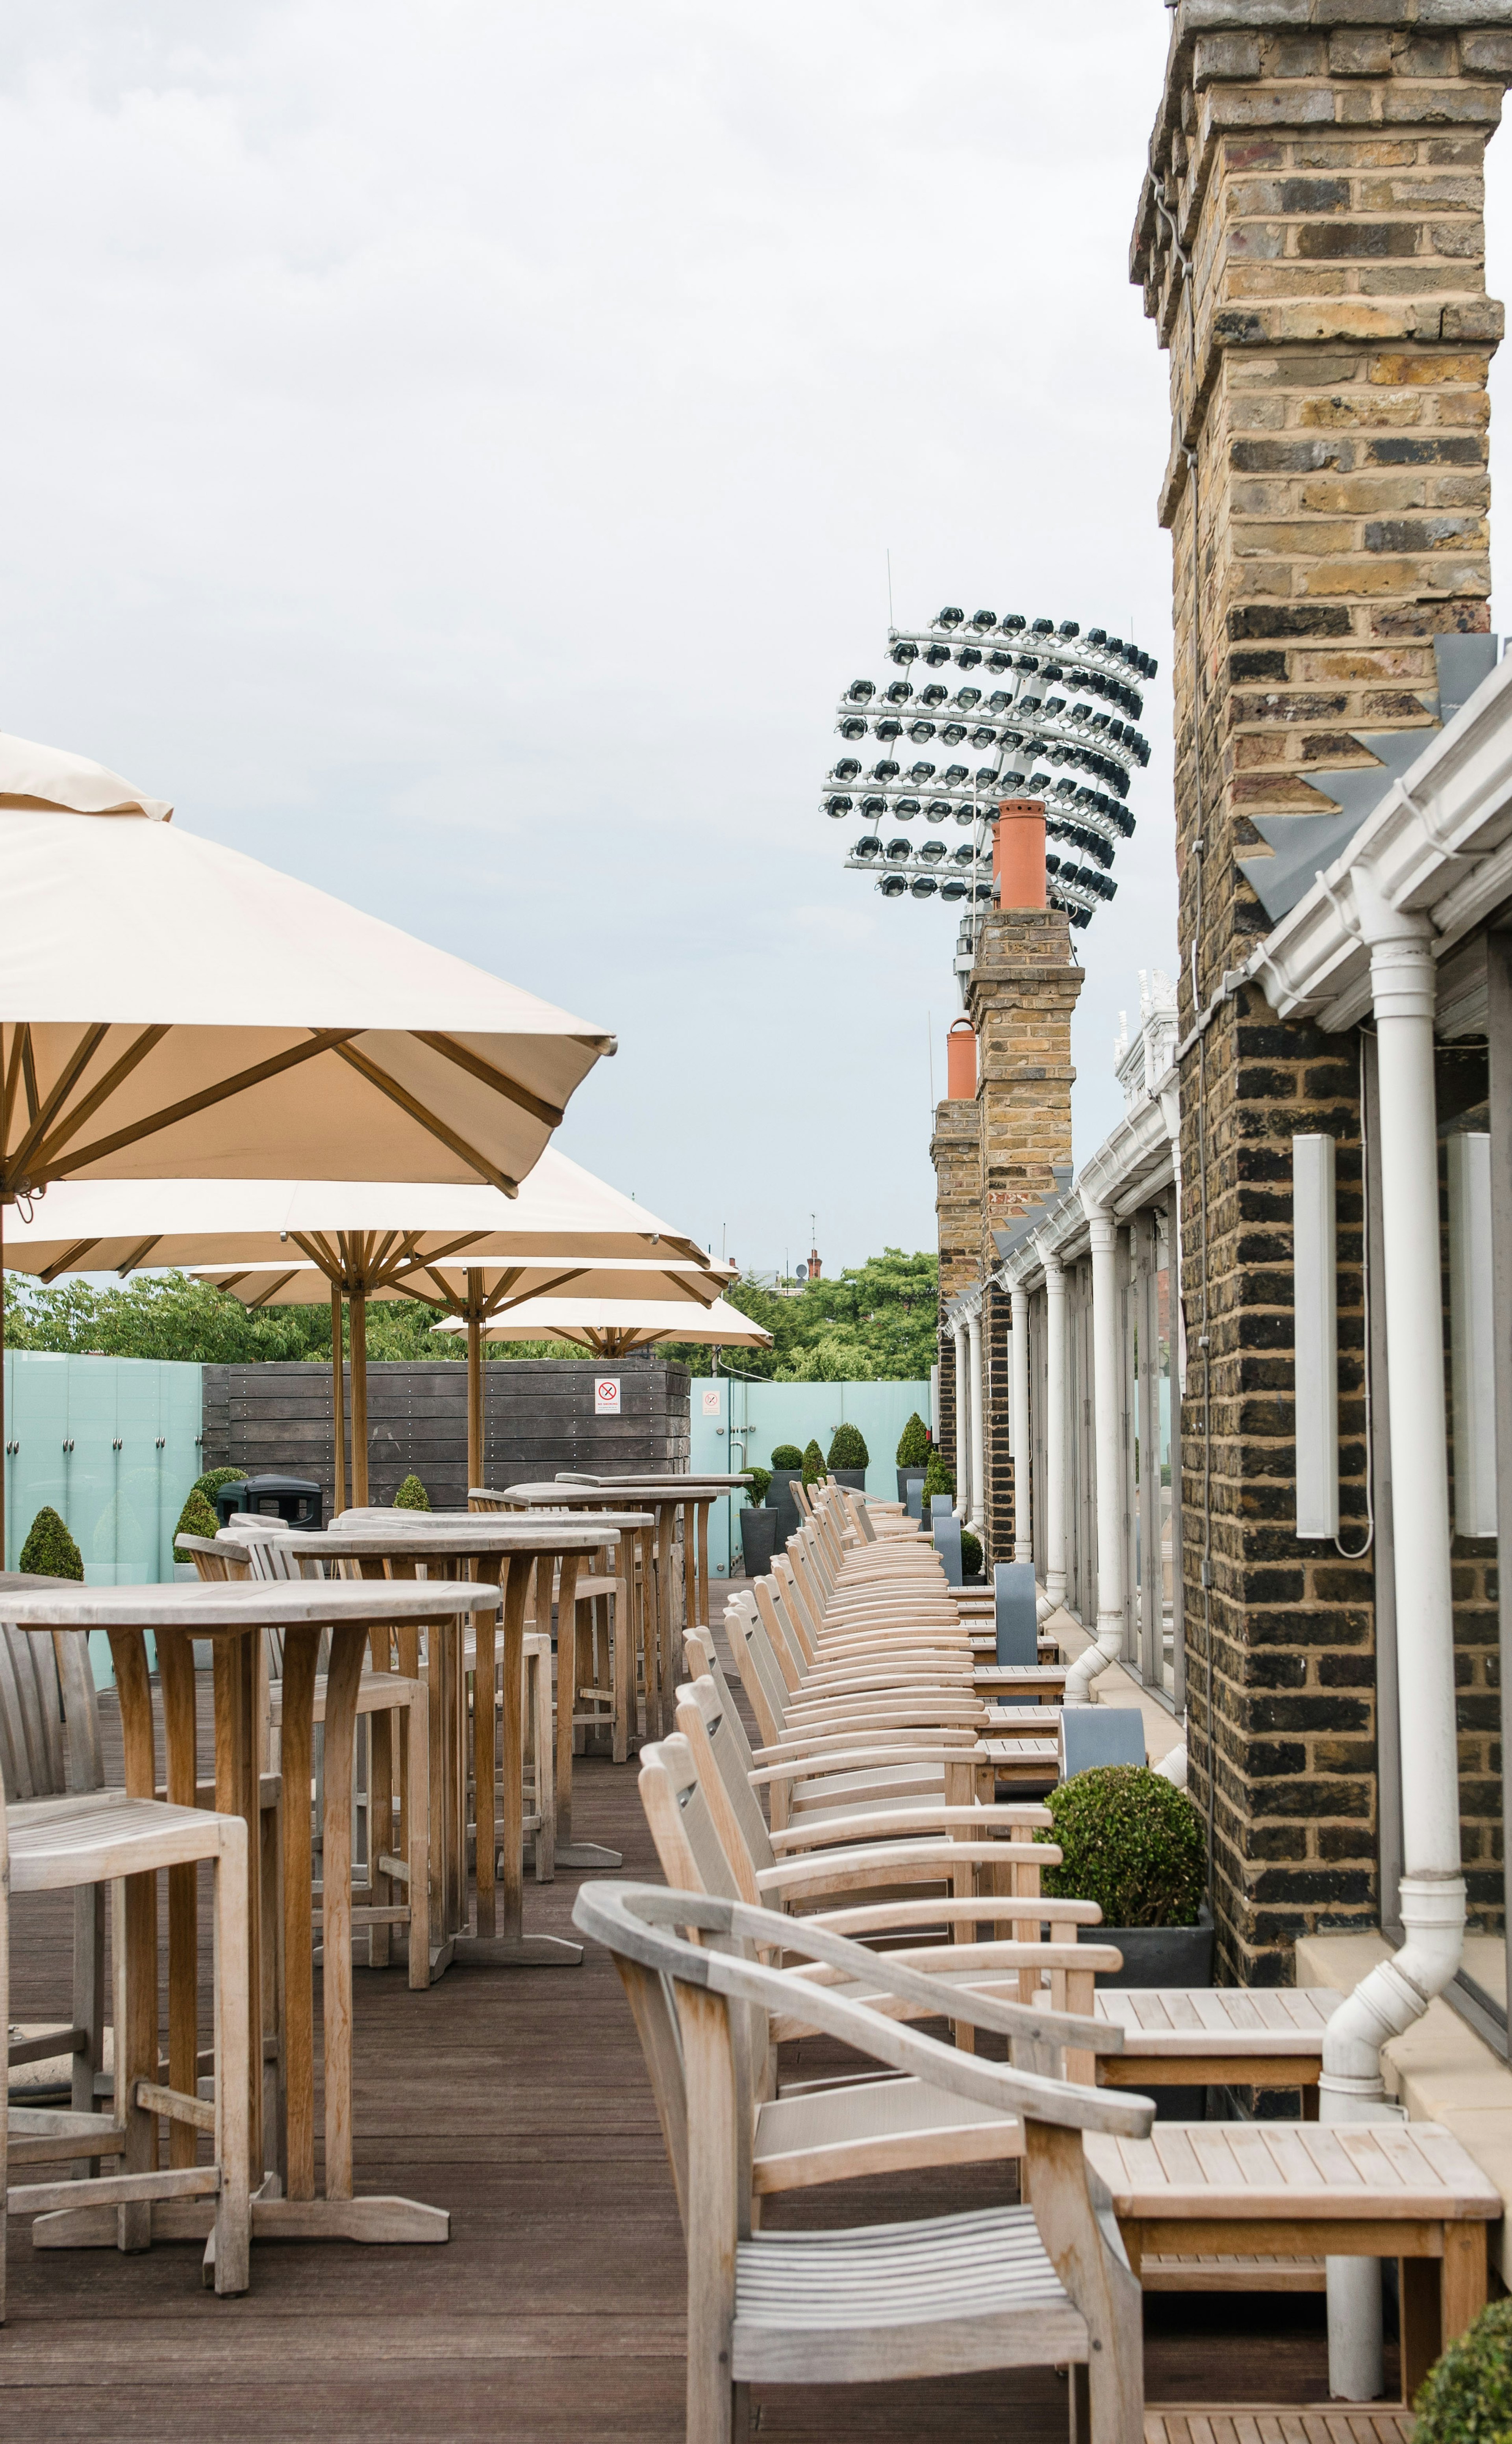 Drinks Venues - Lord's Cricket Ground